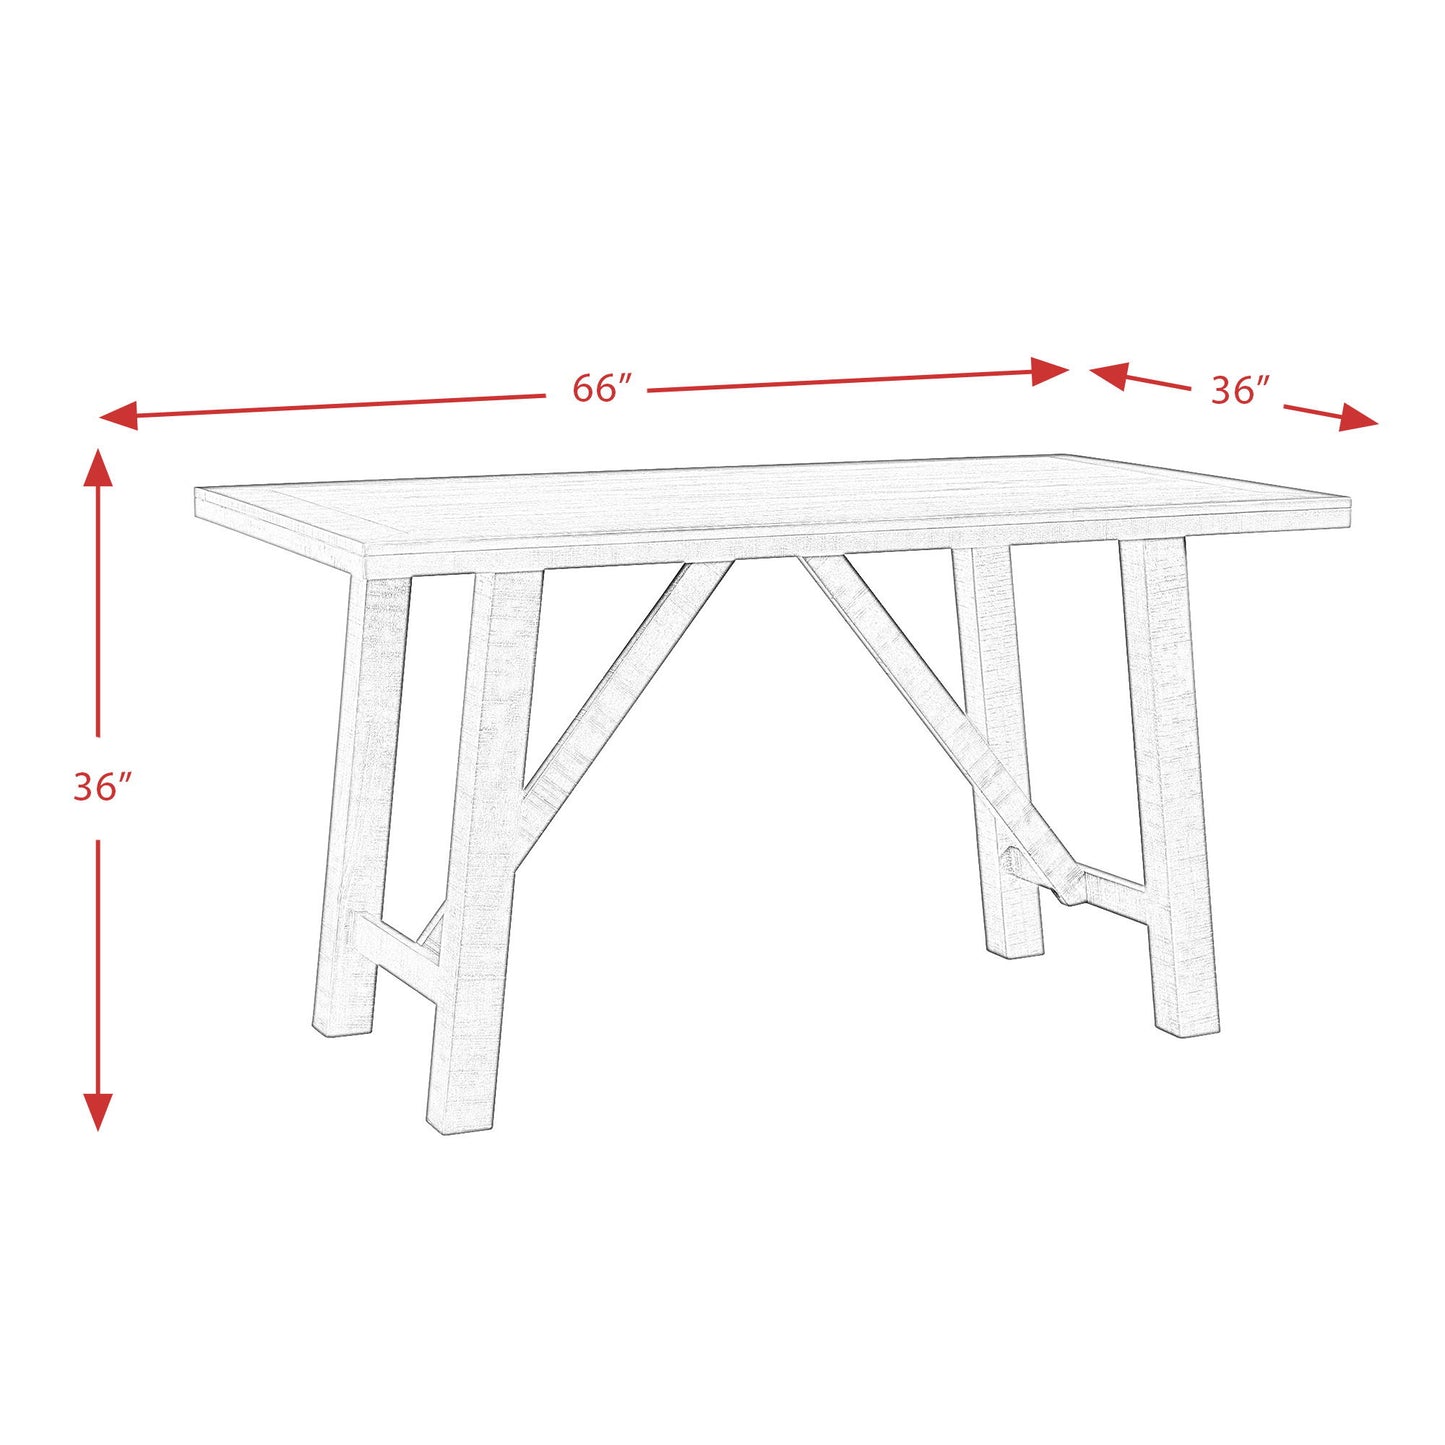 Cash - Dining Table